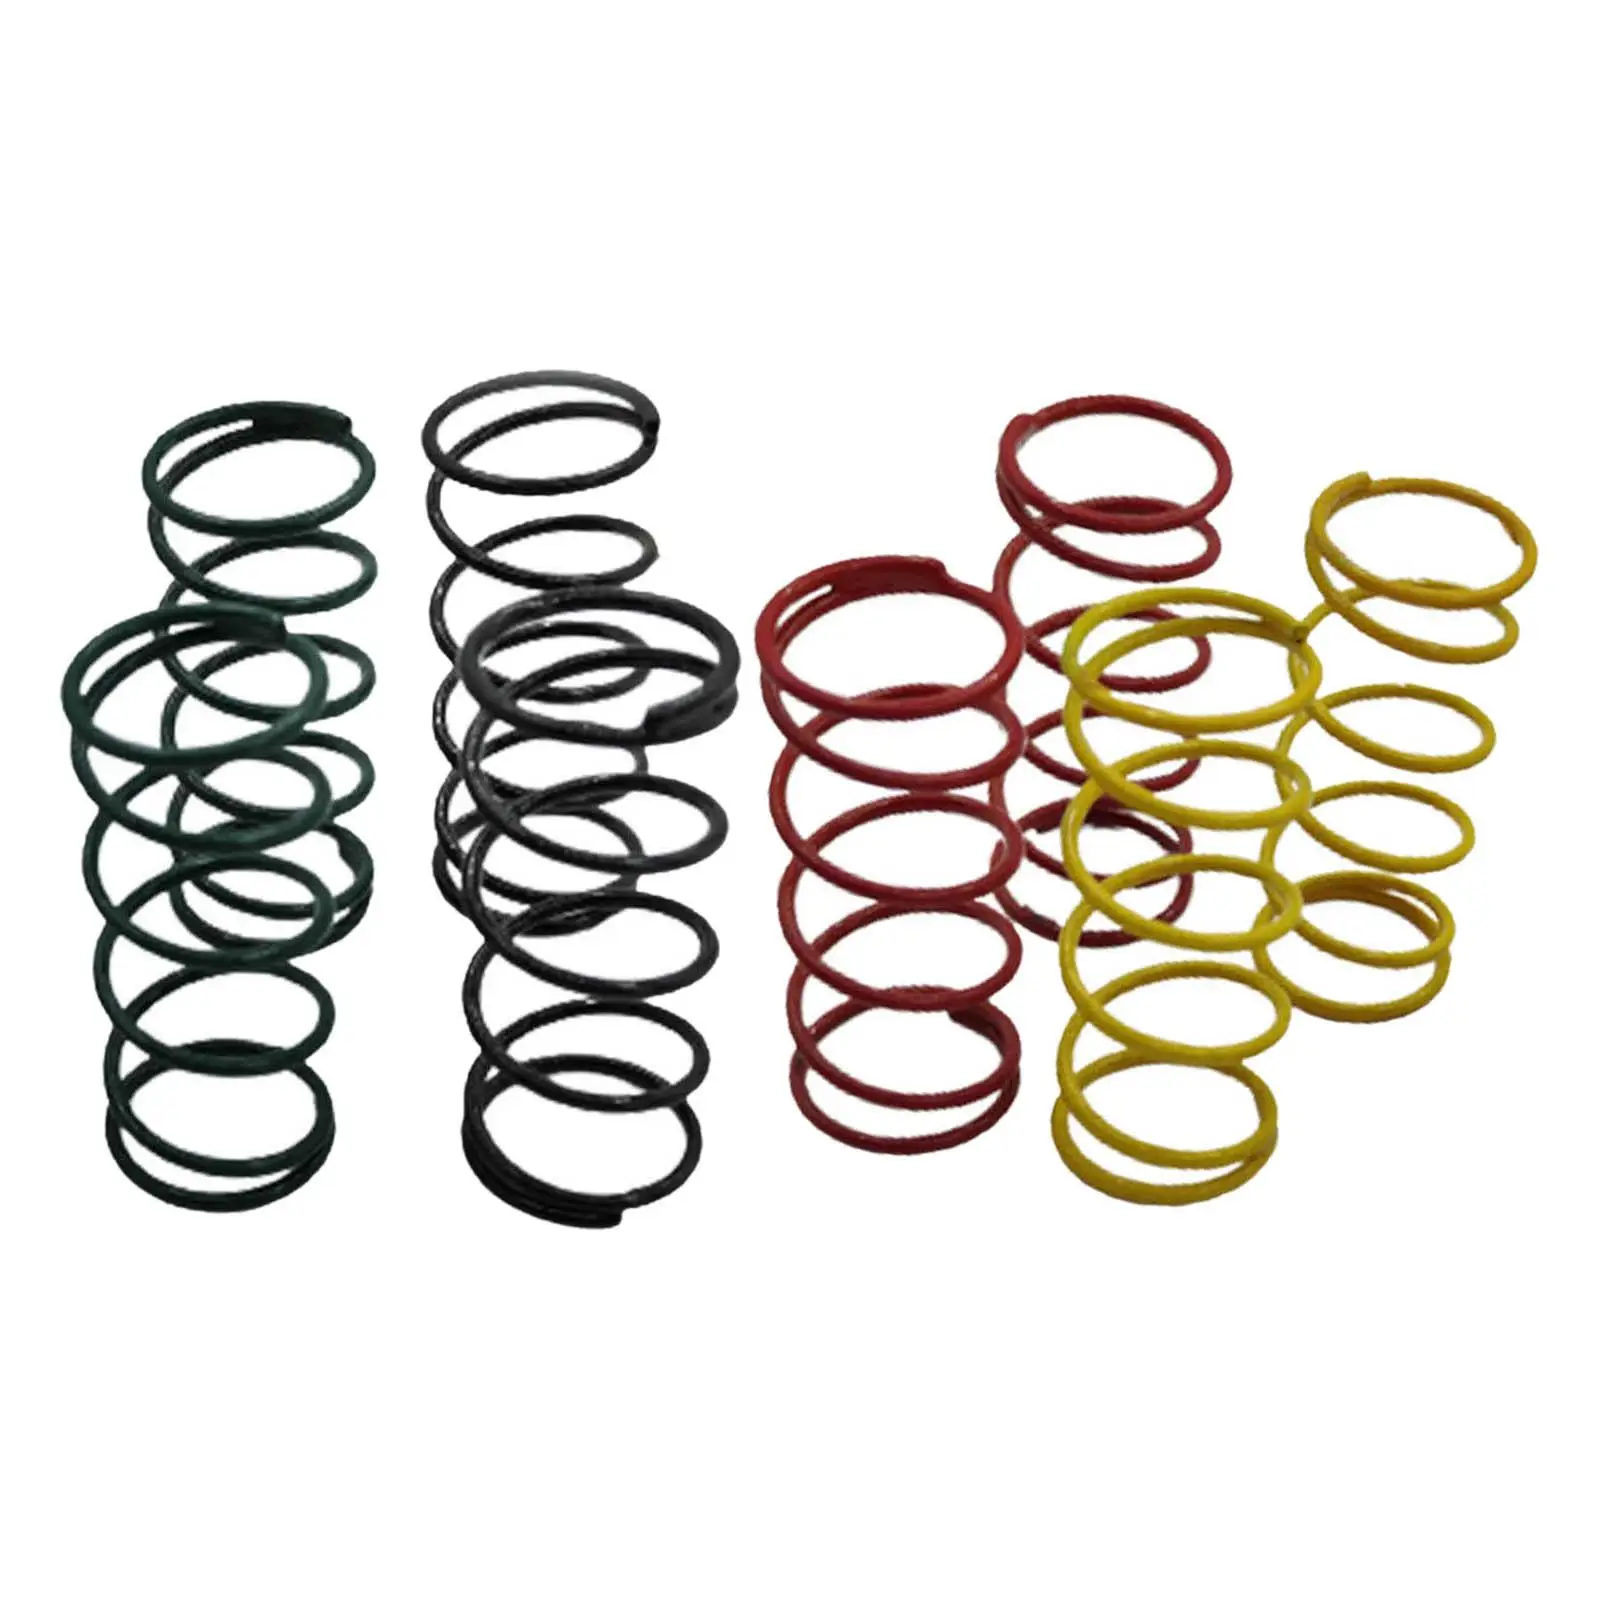 8x Big Bore Shock Spring Set Extension Spring for Traxxas for RC Car Truck